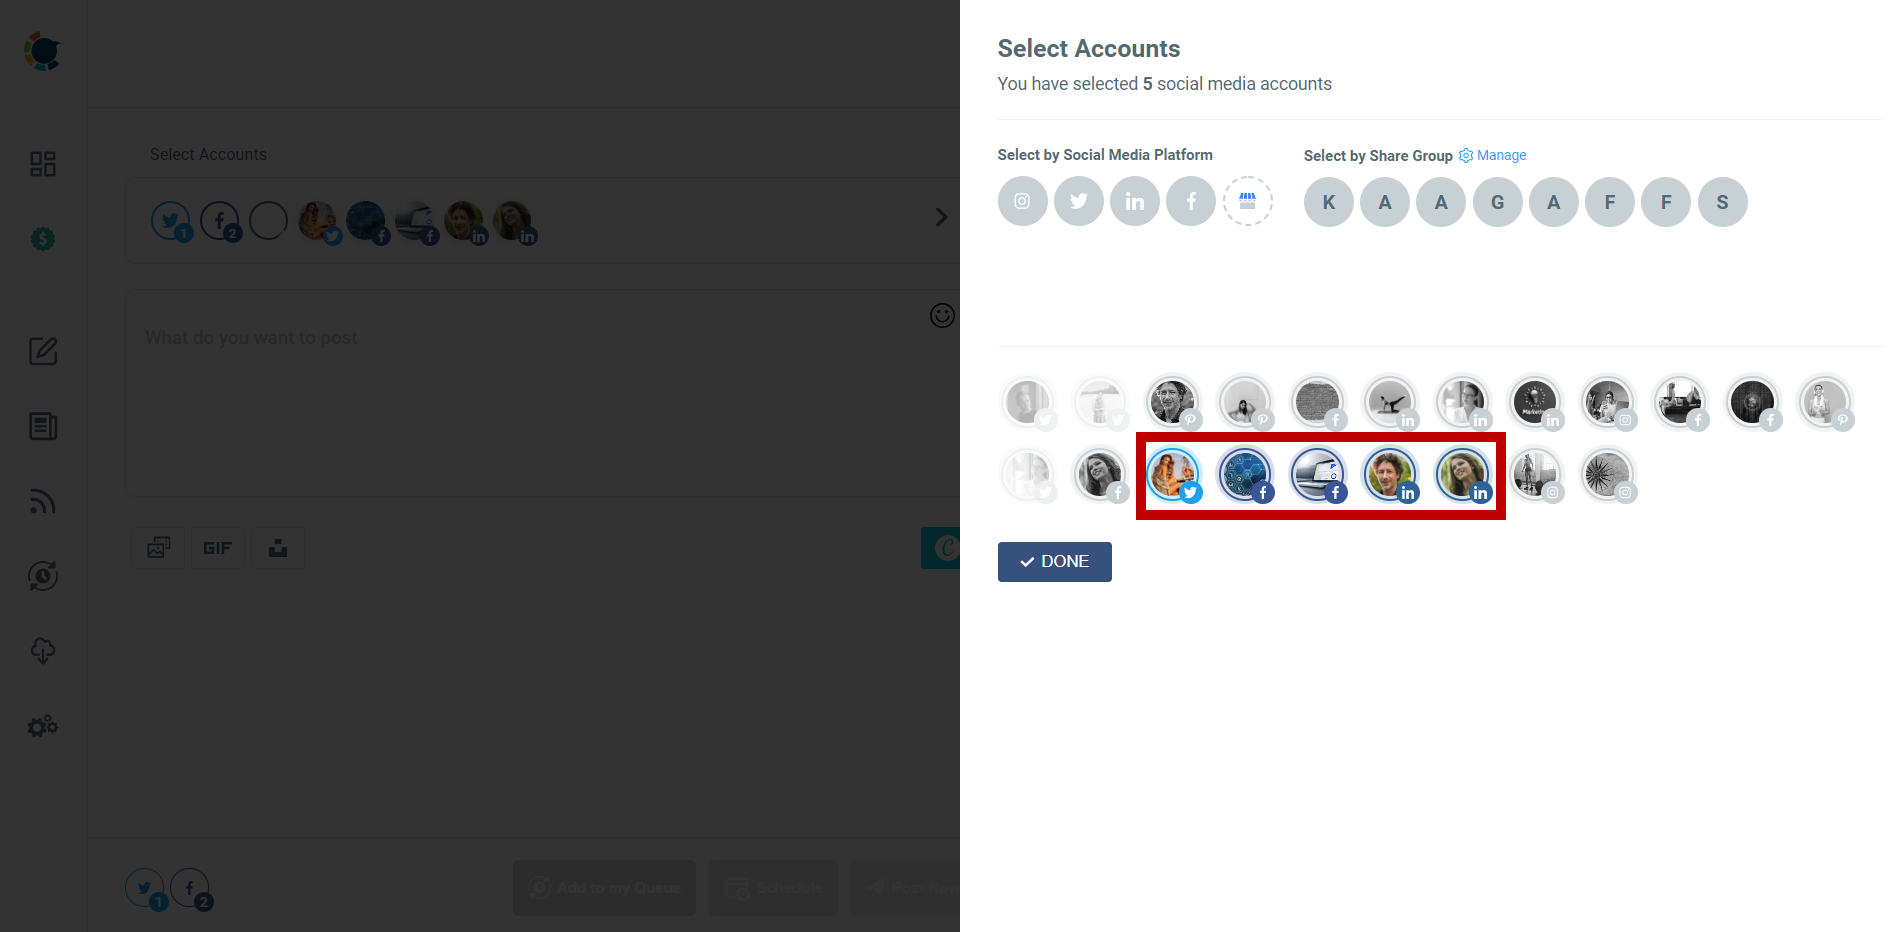 Select your Twitter, Facebook, and LinkedIn accounts you want to create posts for.